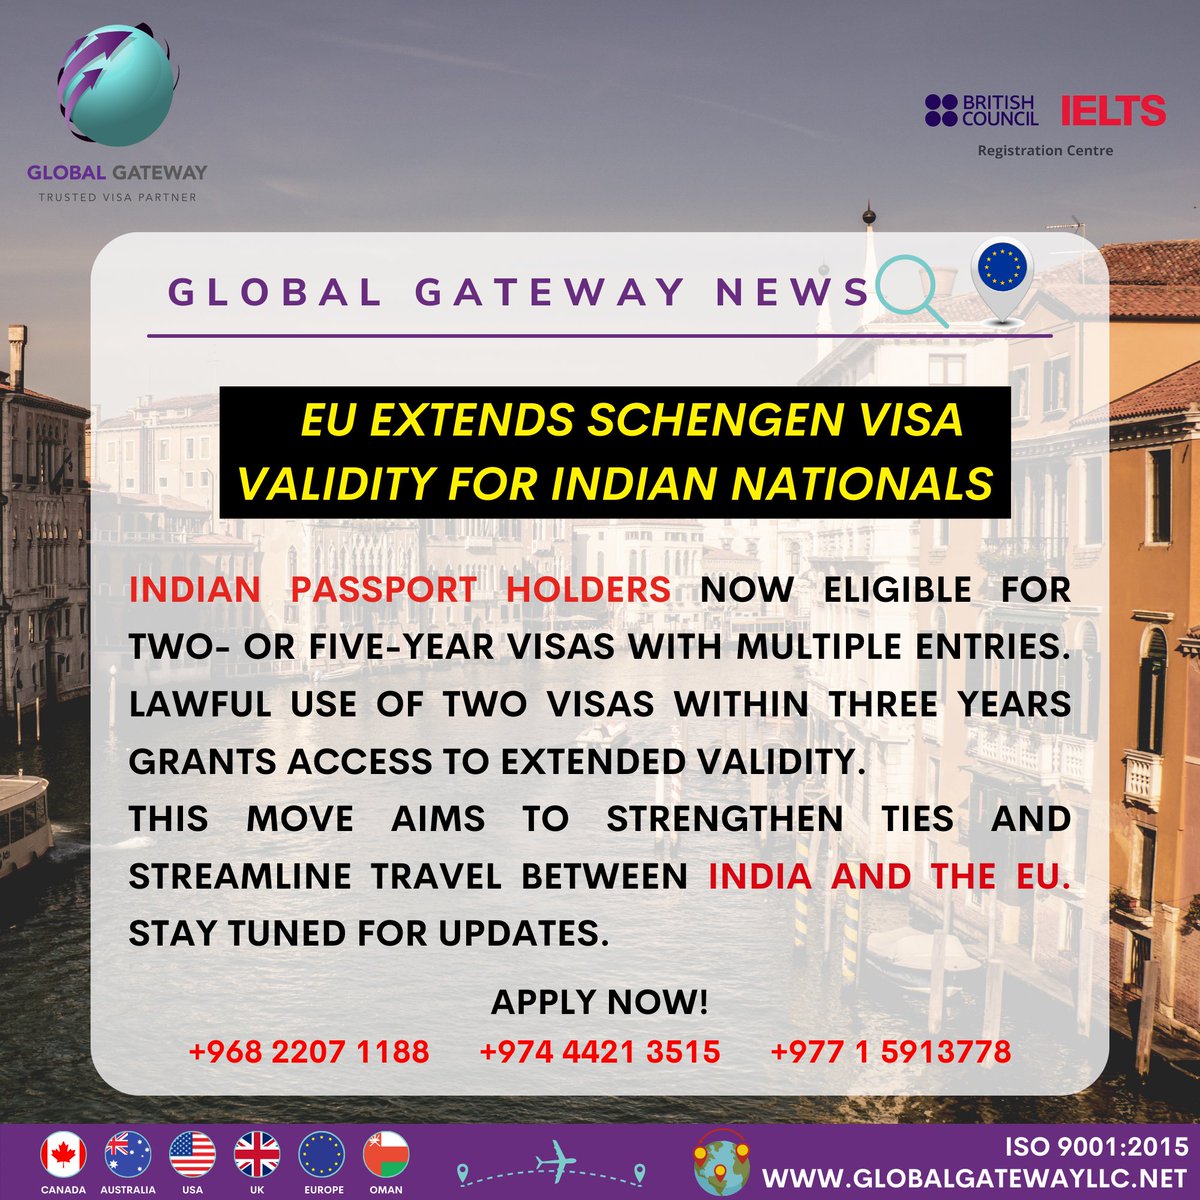 Exciting News for Indian Travelers! 🇮🇳✈️
Now eligible for extended visa options, fostering stronger bonds and smoother travel with the EU.

𝑨𝒑𝒑𝒍𝒚 𝑵𝒐𝒘! 📦💼✨
info@globalgatewayllc.net

#GlobalGateway #VisaPartner #IndianPassport #EUVisa #TravelUpdates